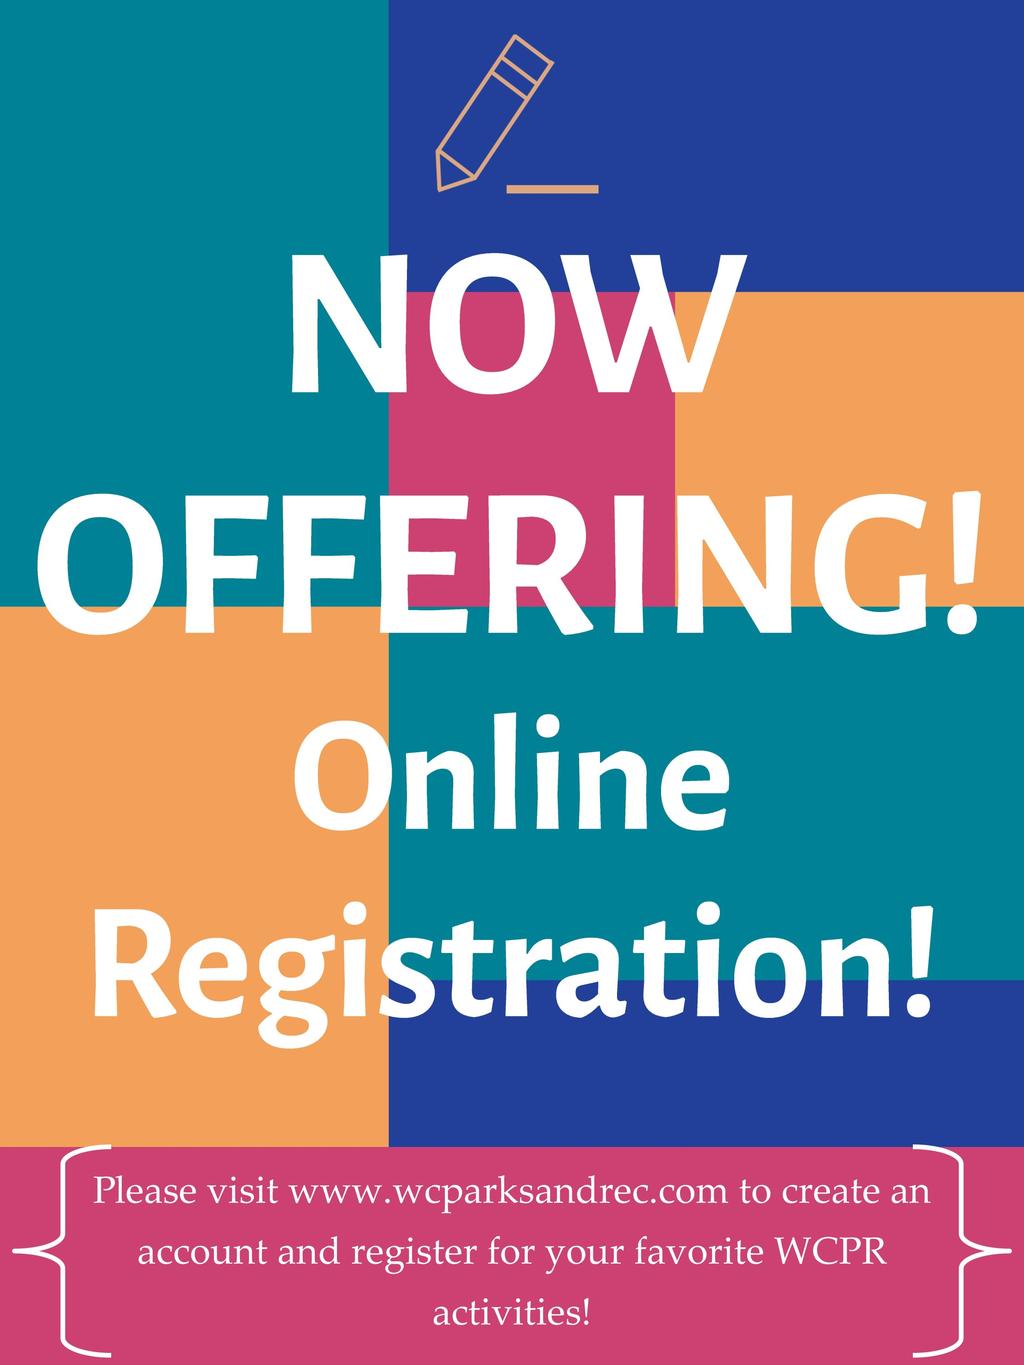 Online Registration Codes will be listed with ALL activities that require